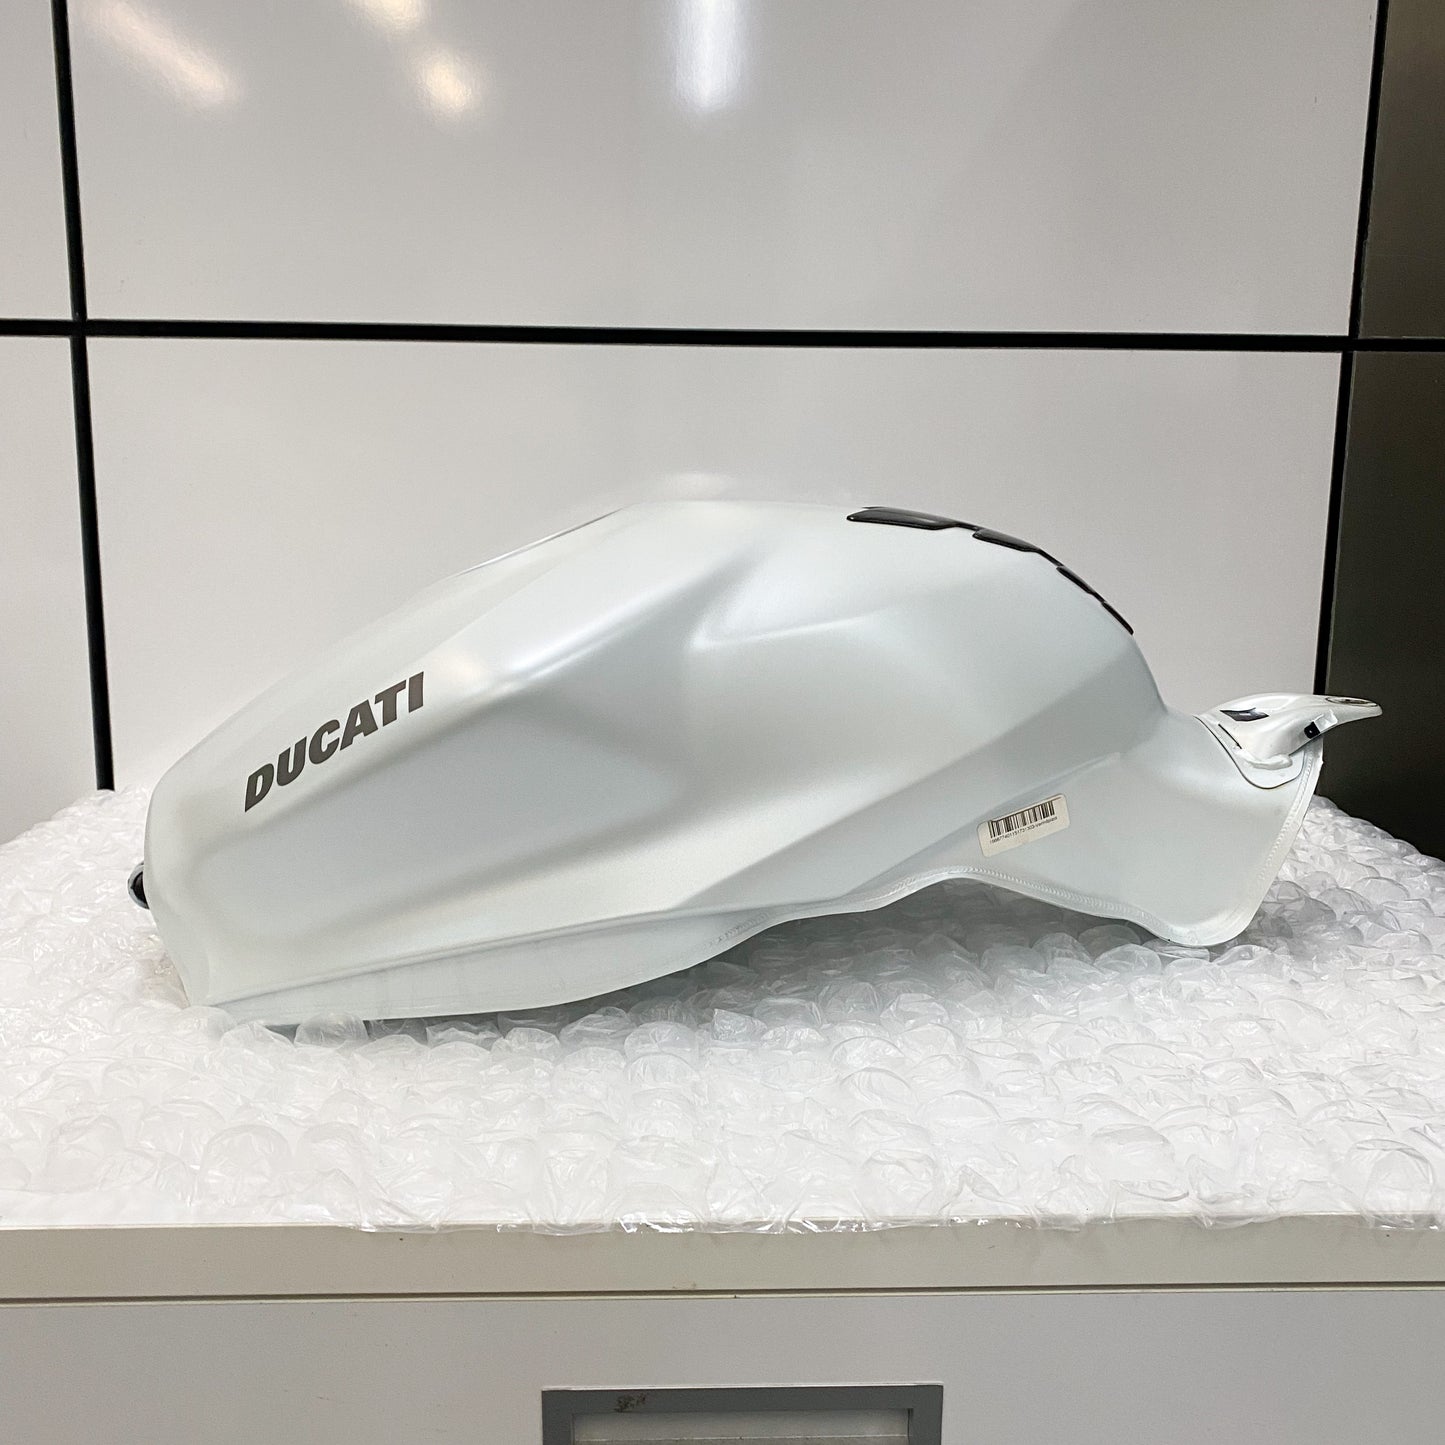 Ducati 959/899 Panigale Gas Tank, White 58612061AW USED